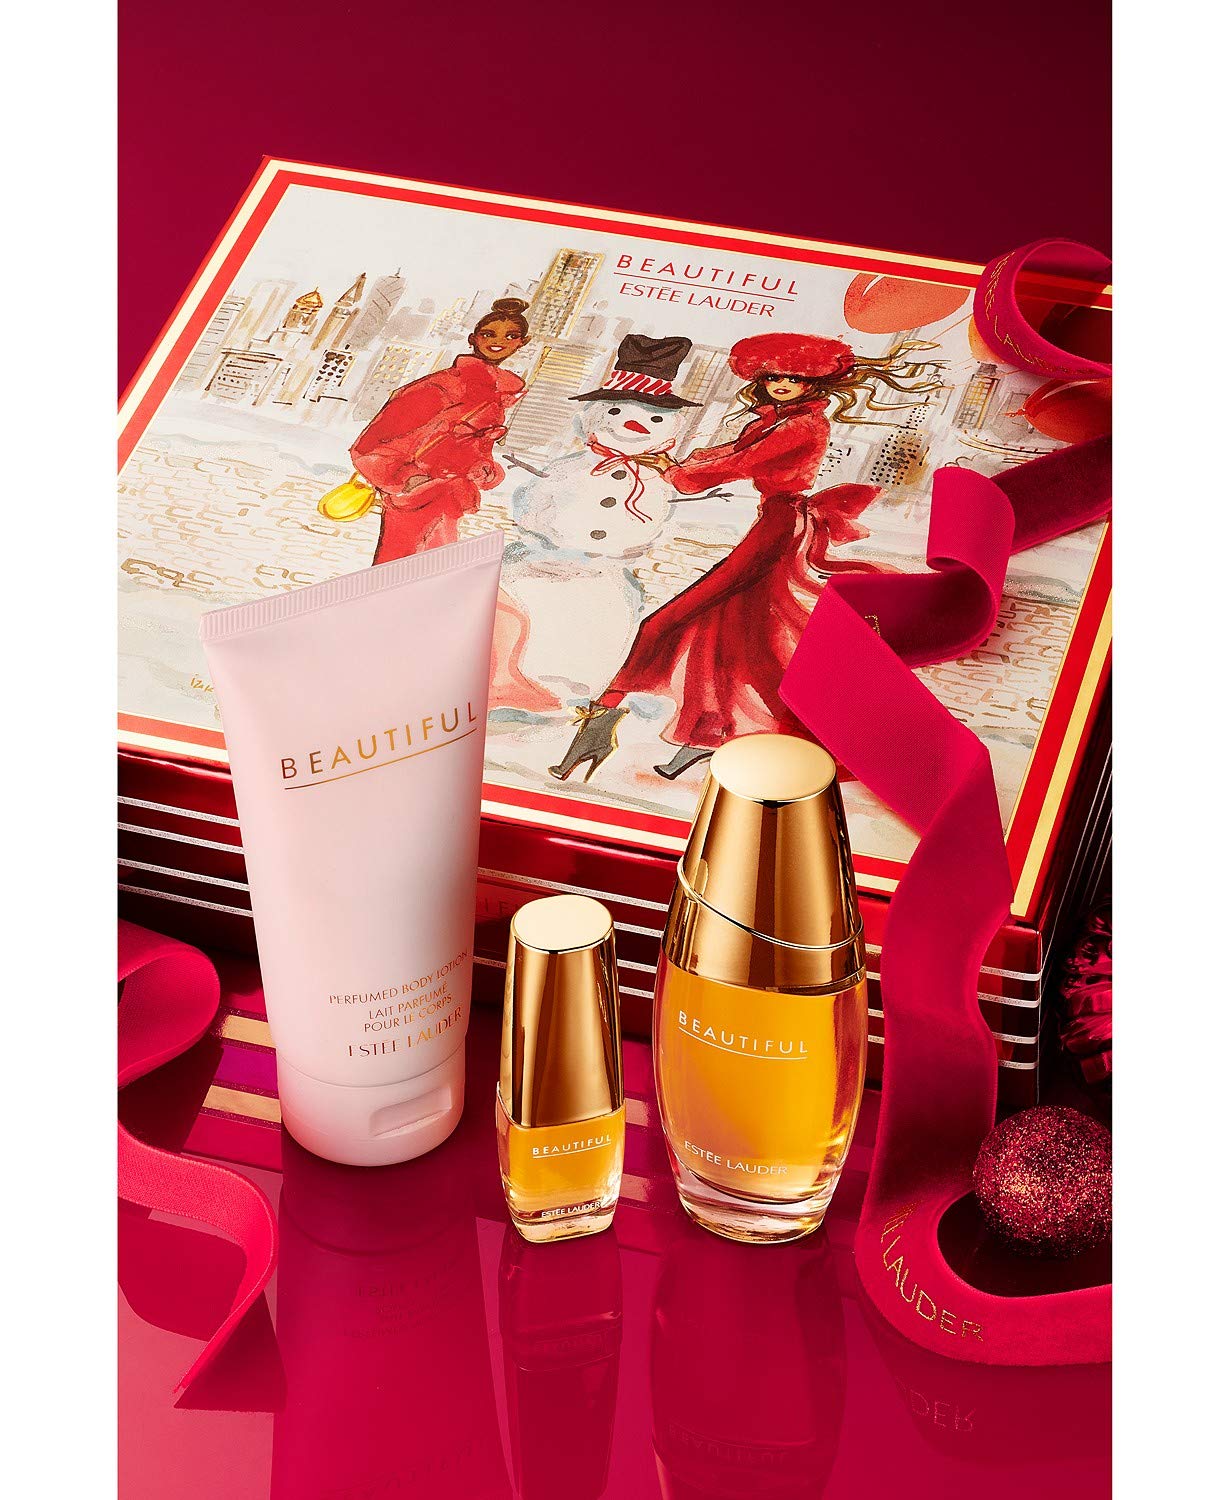 Beautiful To Go 3 Piece Fragrance Set by Estee Lauder